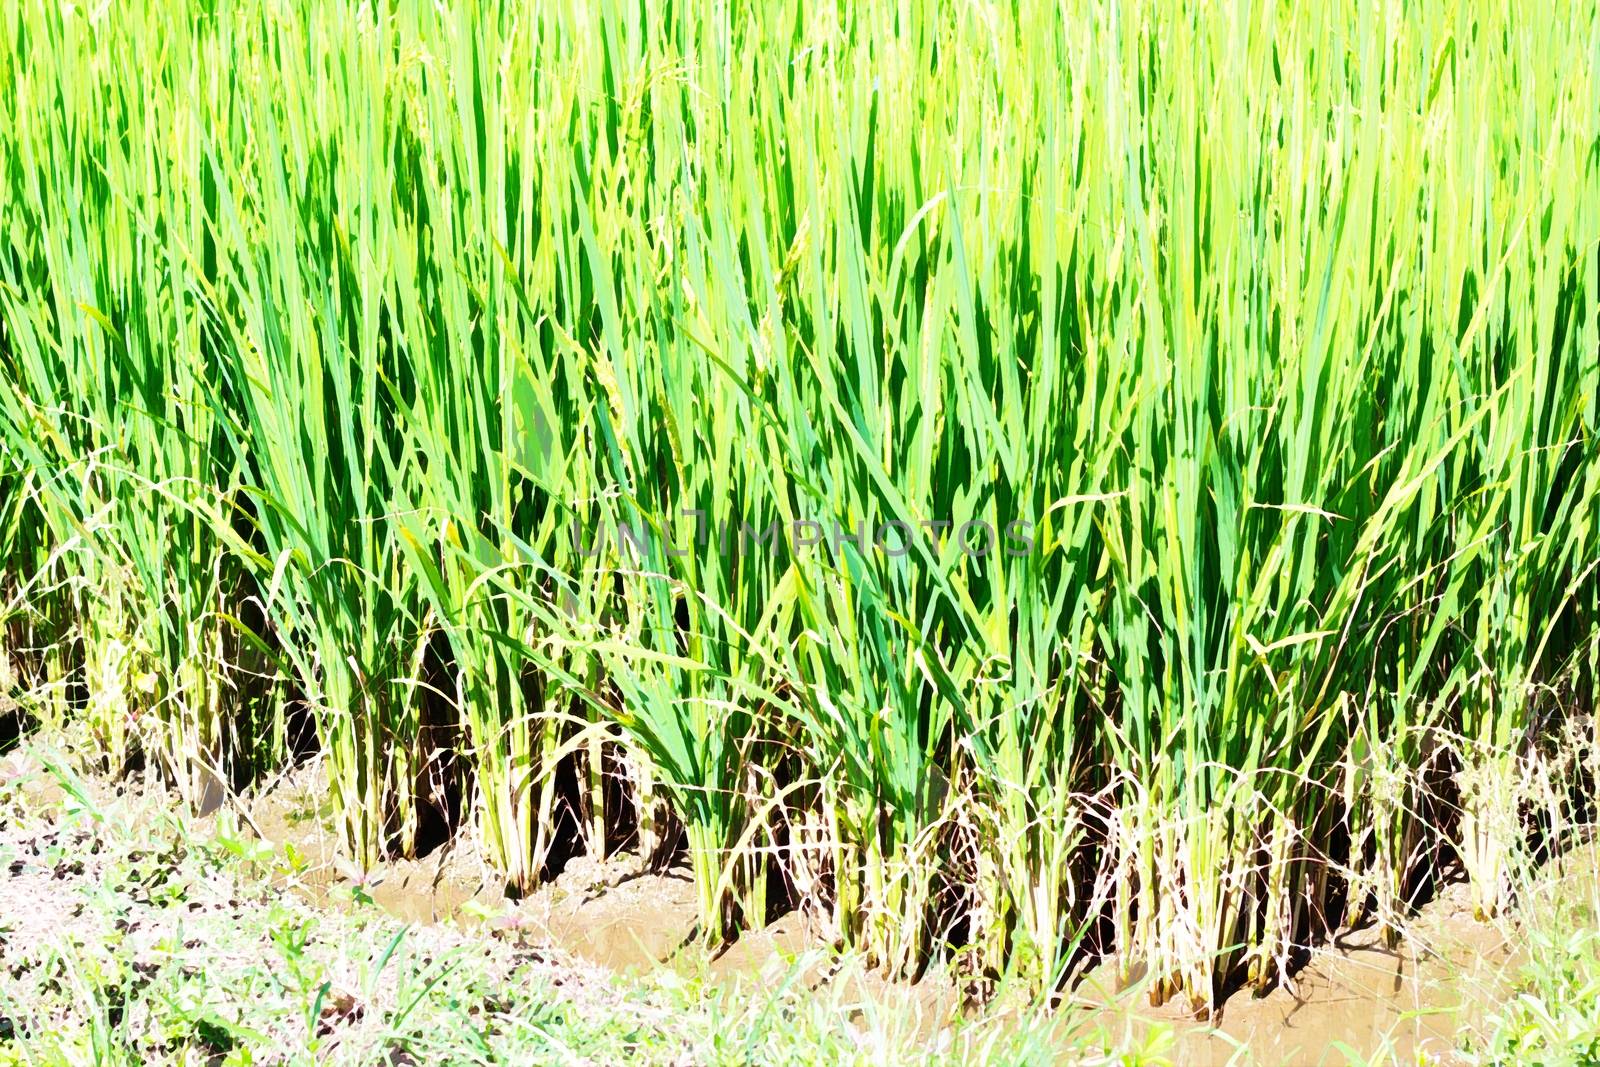 Close-up rice plants in rice field, watercolor style